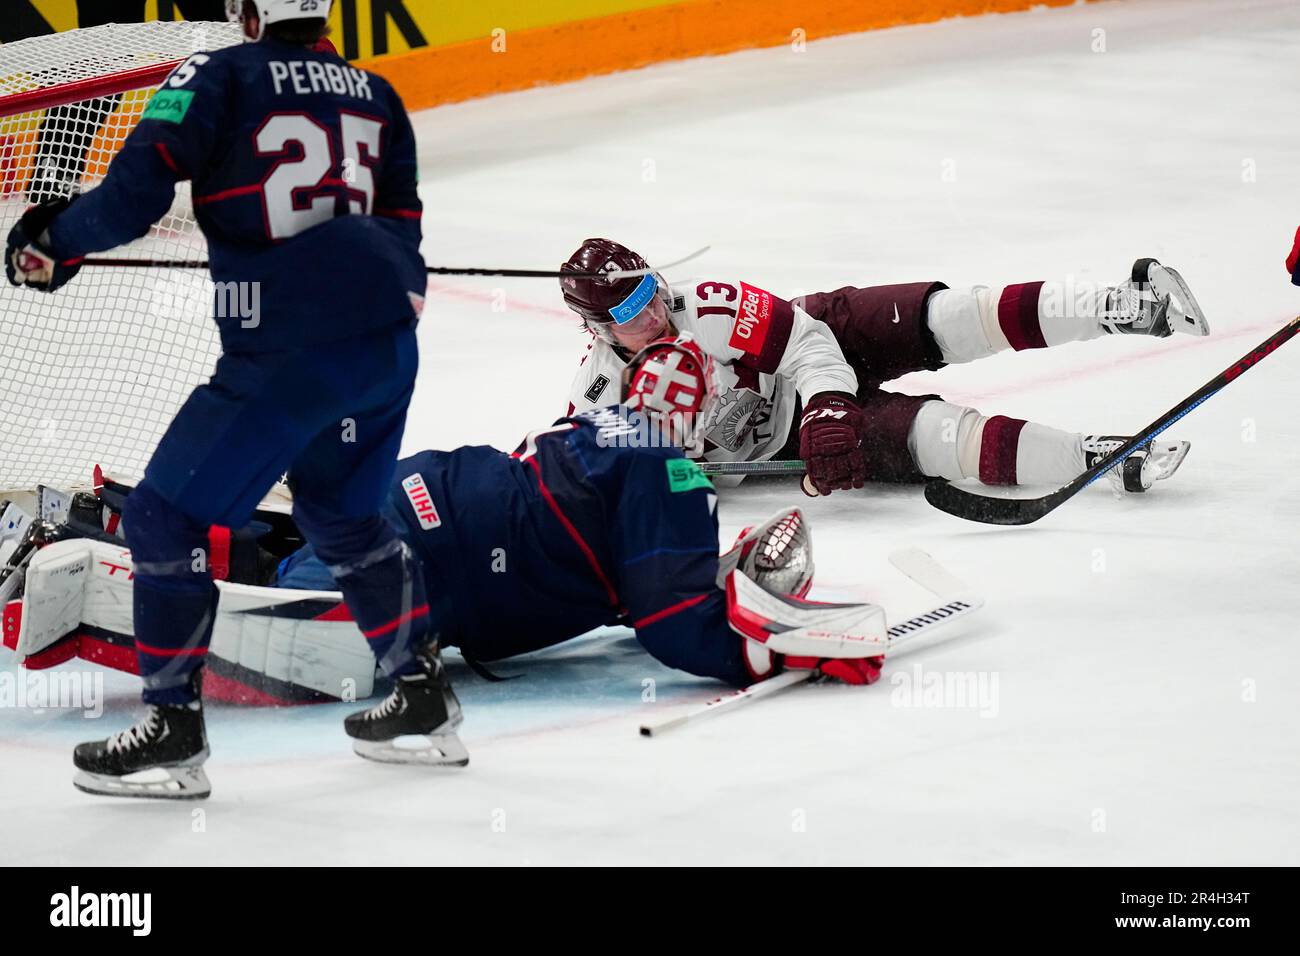 United States goalie Casey DeSmith defends the net against Latvias Rihards Bukarts (13) in their bronze medal match at the Ice Hockey World Championship in Tampere, Finland, Sunday, May 28, 2023